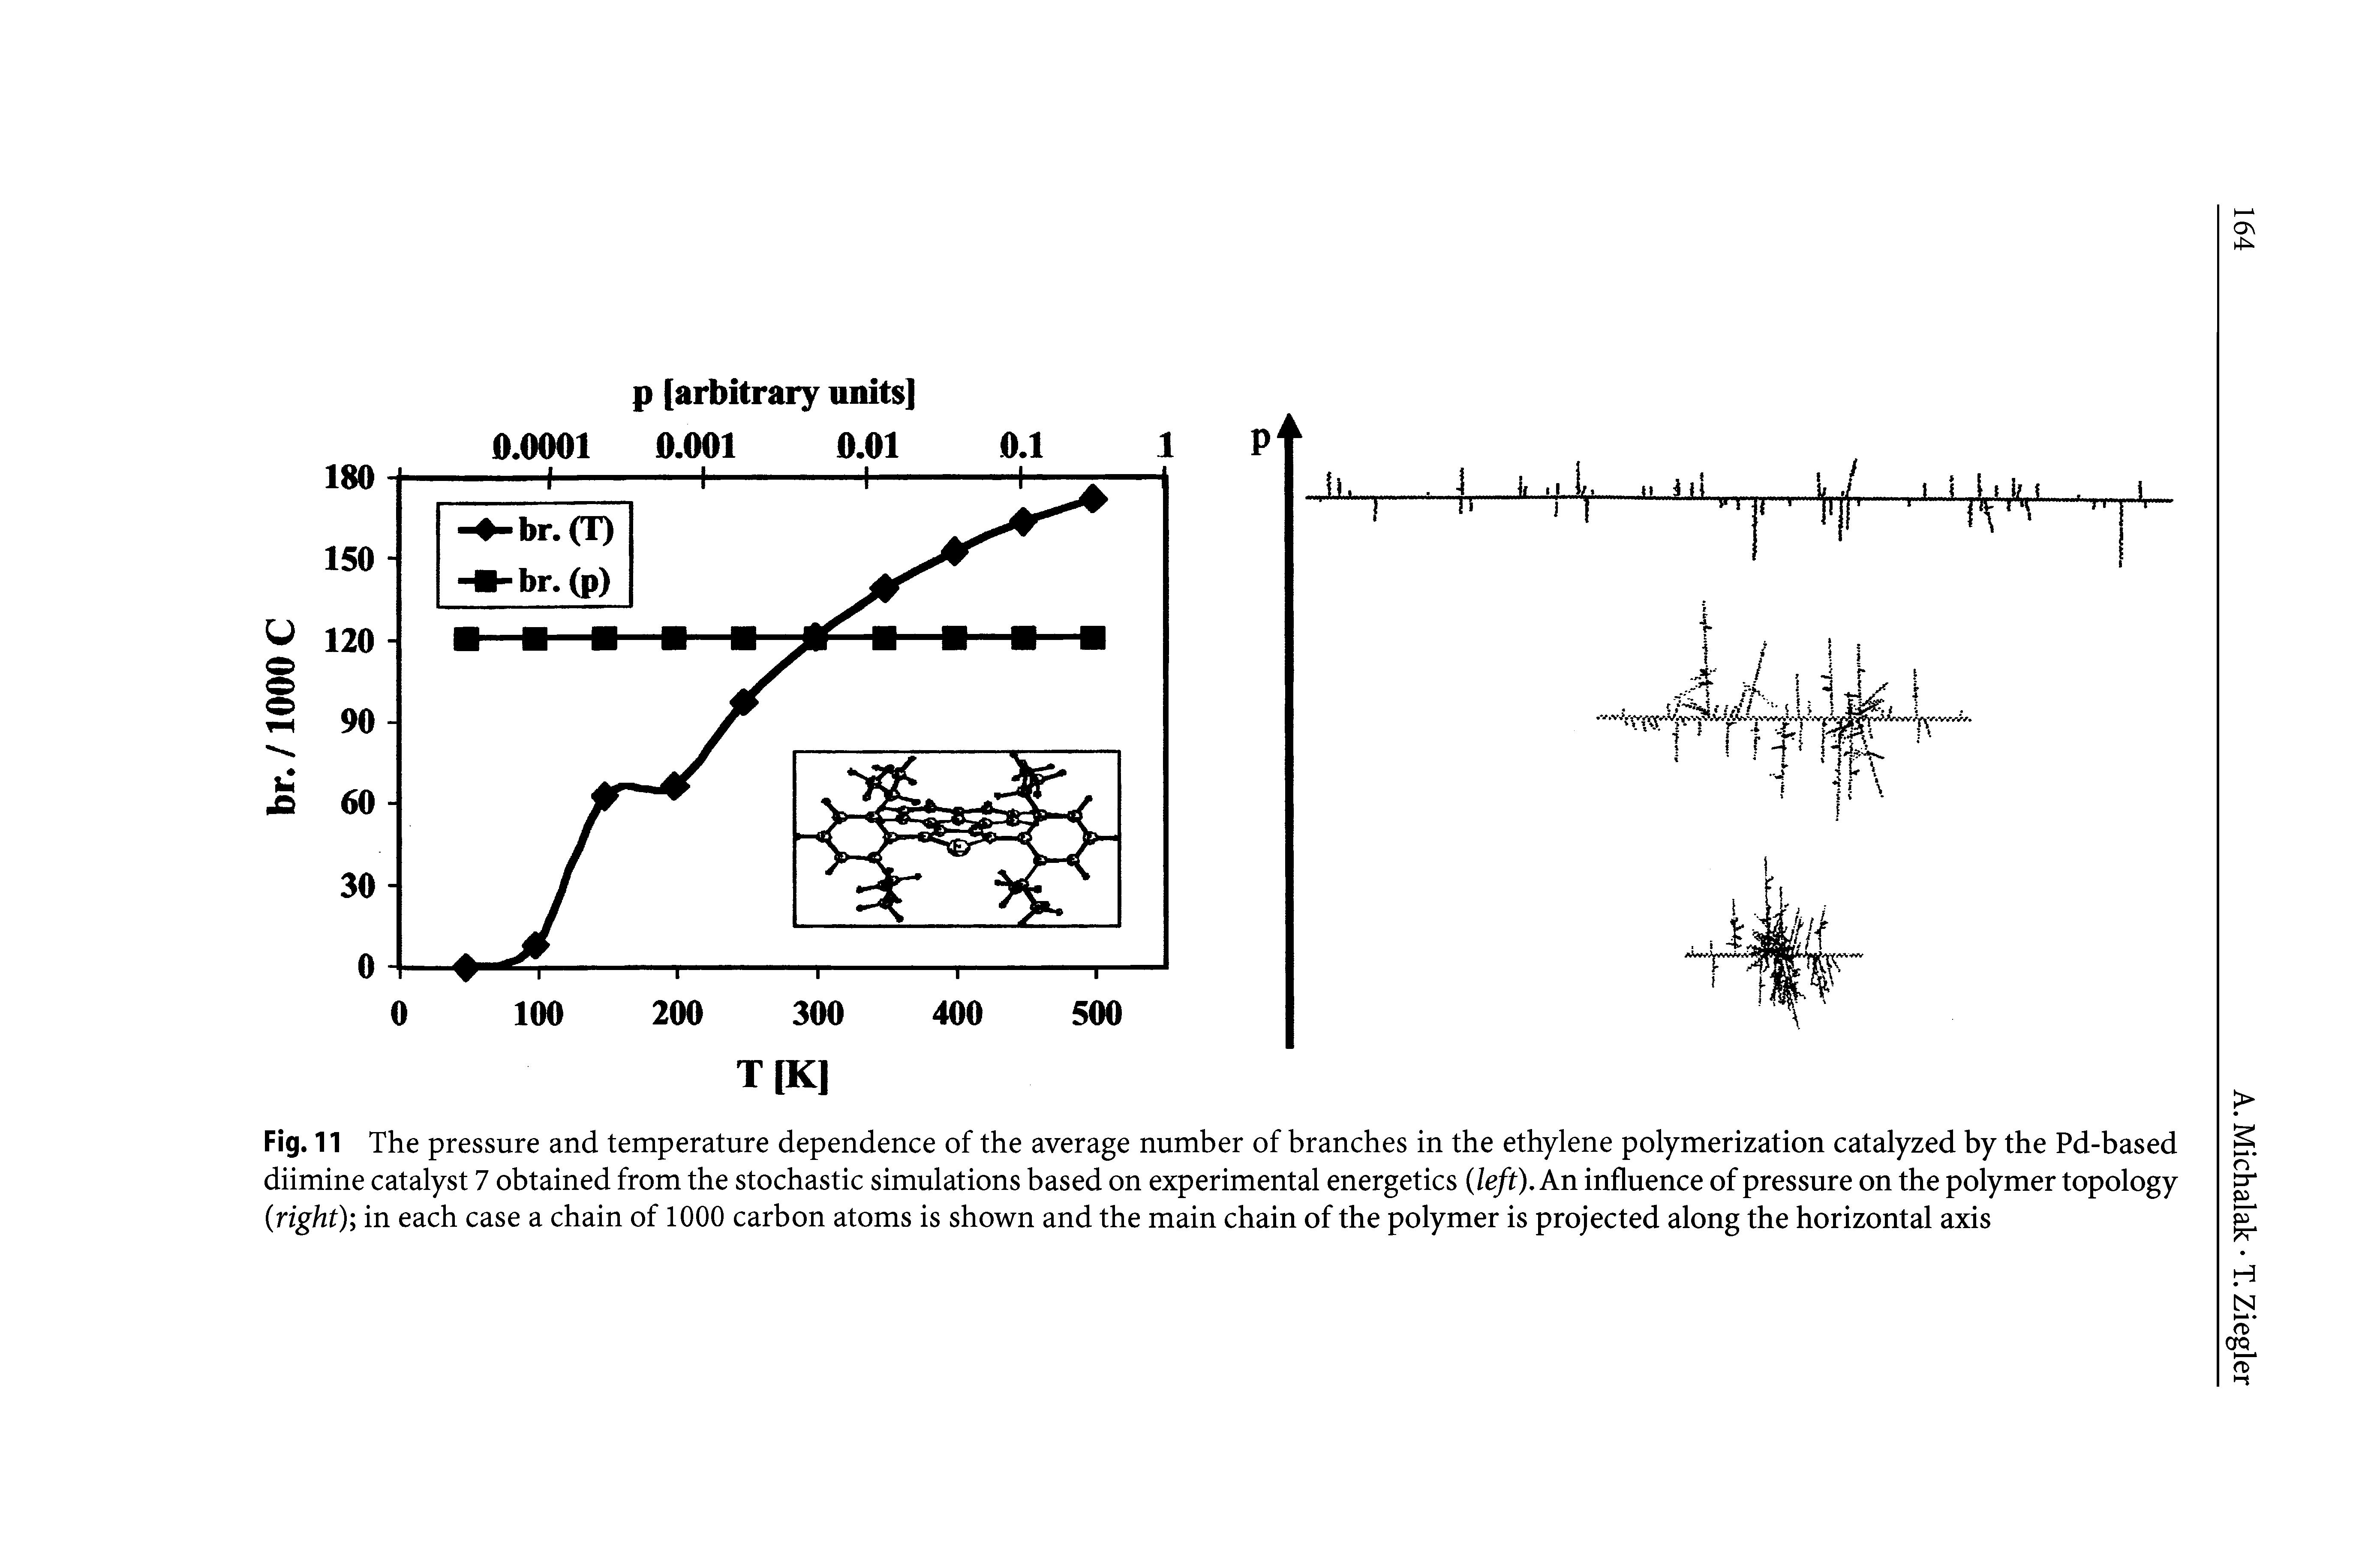 Fig. 11 The pressure and temperature dependence of the average number of branches in the ethylene polymerization catalyzed by the Pd-based diimine catalyst 7 obtained from the stochastic simulations based on experimental energetics (left). An influence of pressure on the polymer topology (right) in each case a chain of 1000 carbon atoms is shown and the main chain of the polymer is projected along the horizontal axis...